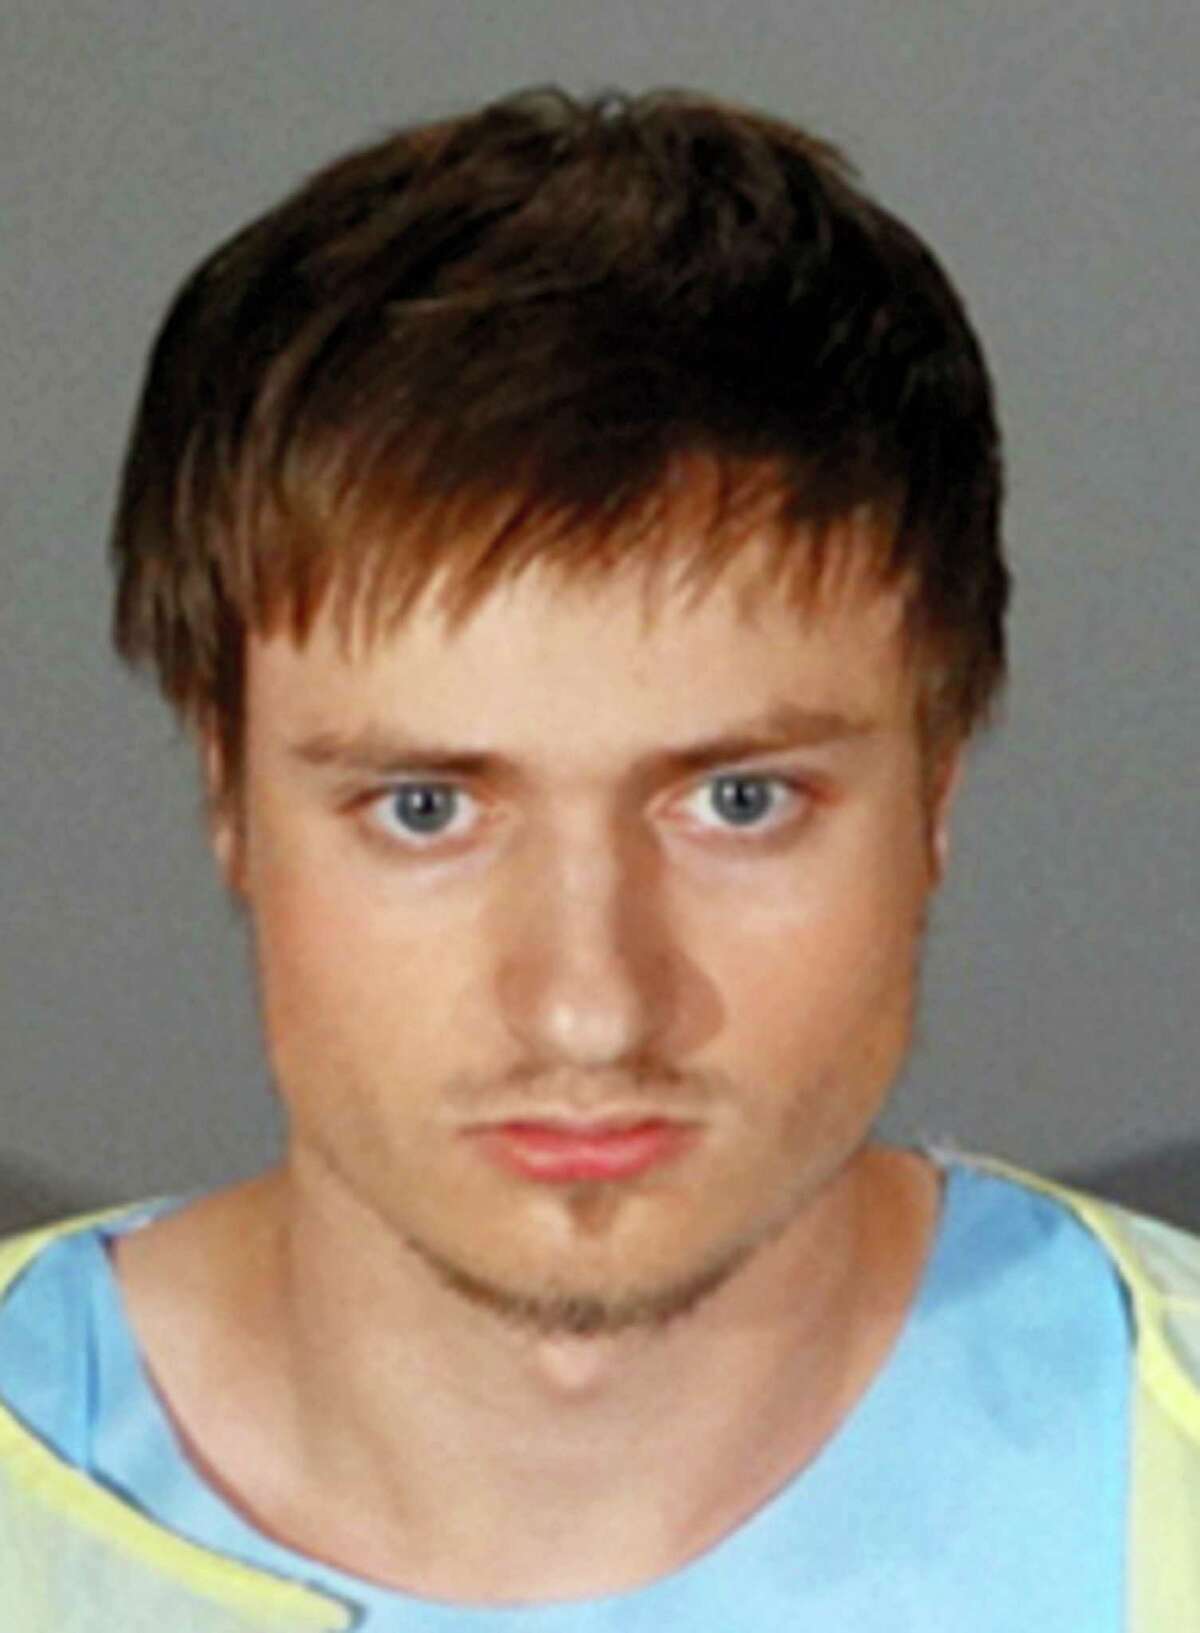 This June 12, 2016, law enforcement booking photo provided by the Santa Monica, Calif., Police Department shows James Wesley Howell, 20, of Indiana. Police say Howell was the heavily armed man arrested in Santa Monica on his way to a Southern California gay pride parade, who told them he wanted to do harm to the event.